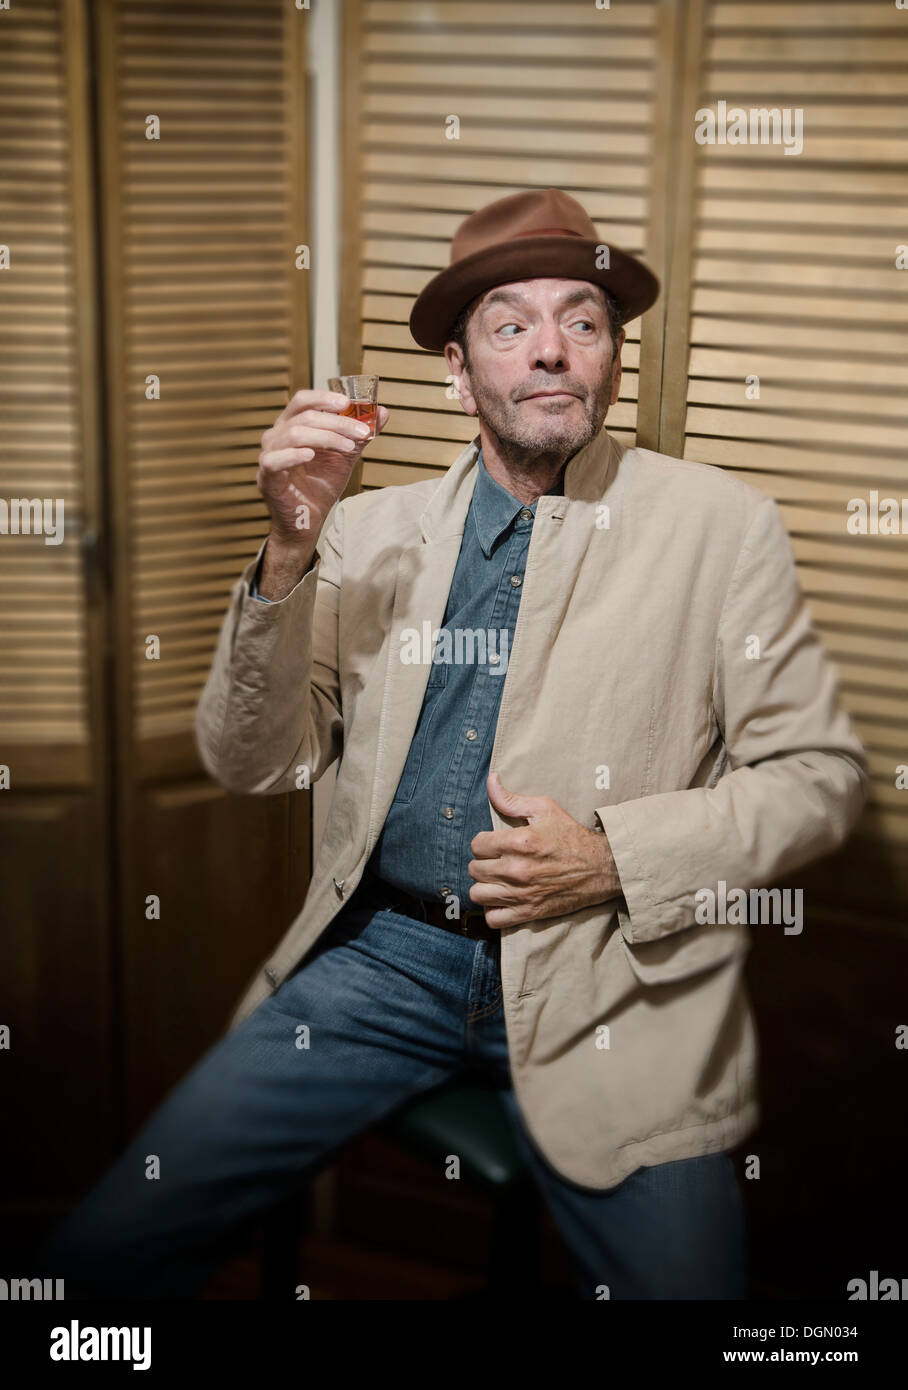 carefree man drinking from shot glass Stock Photo